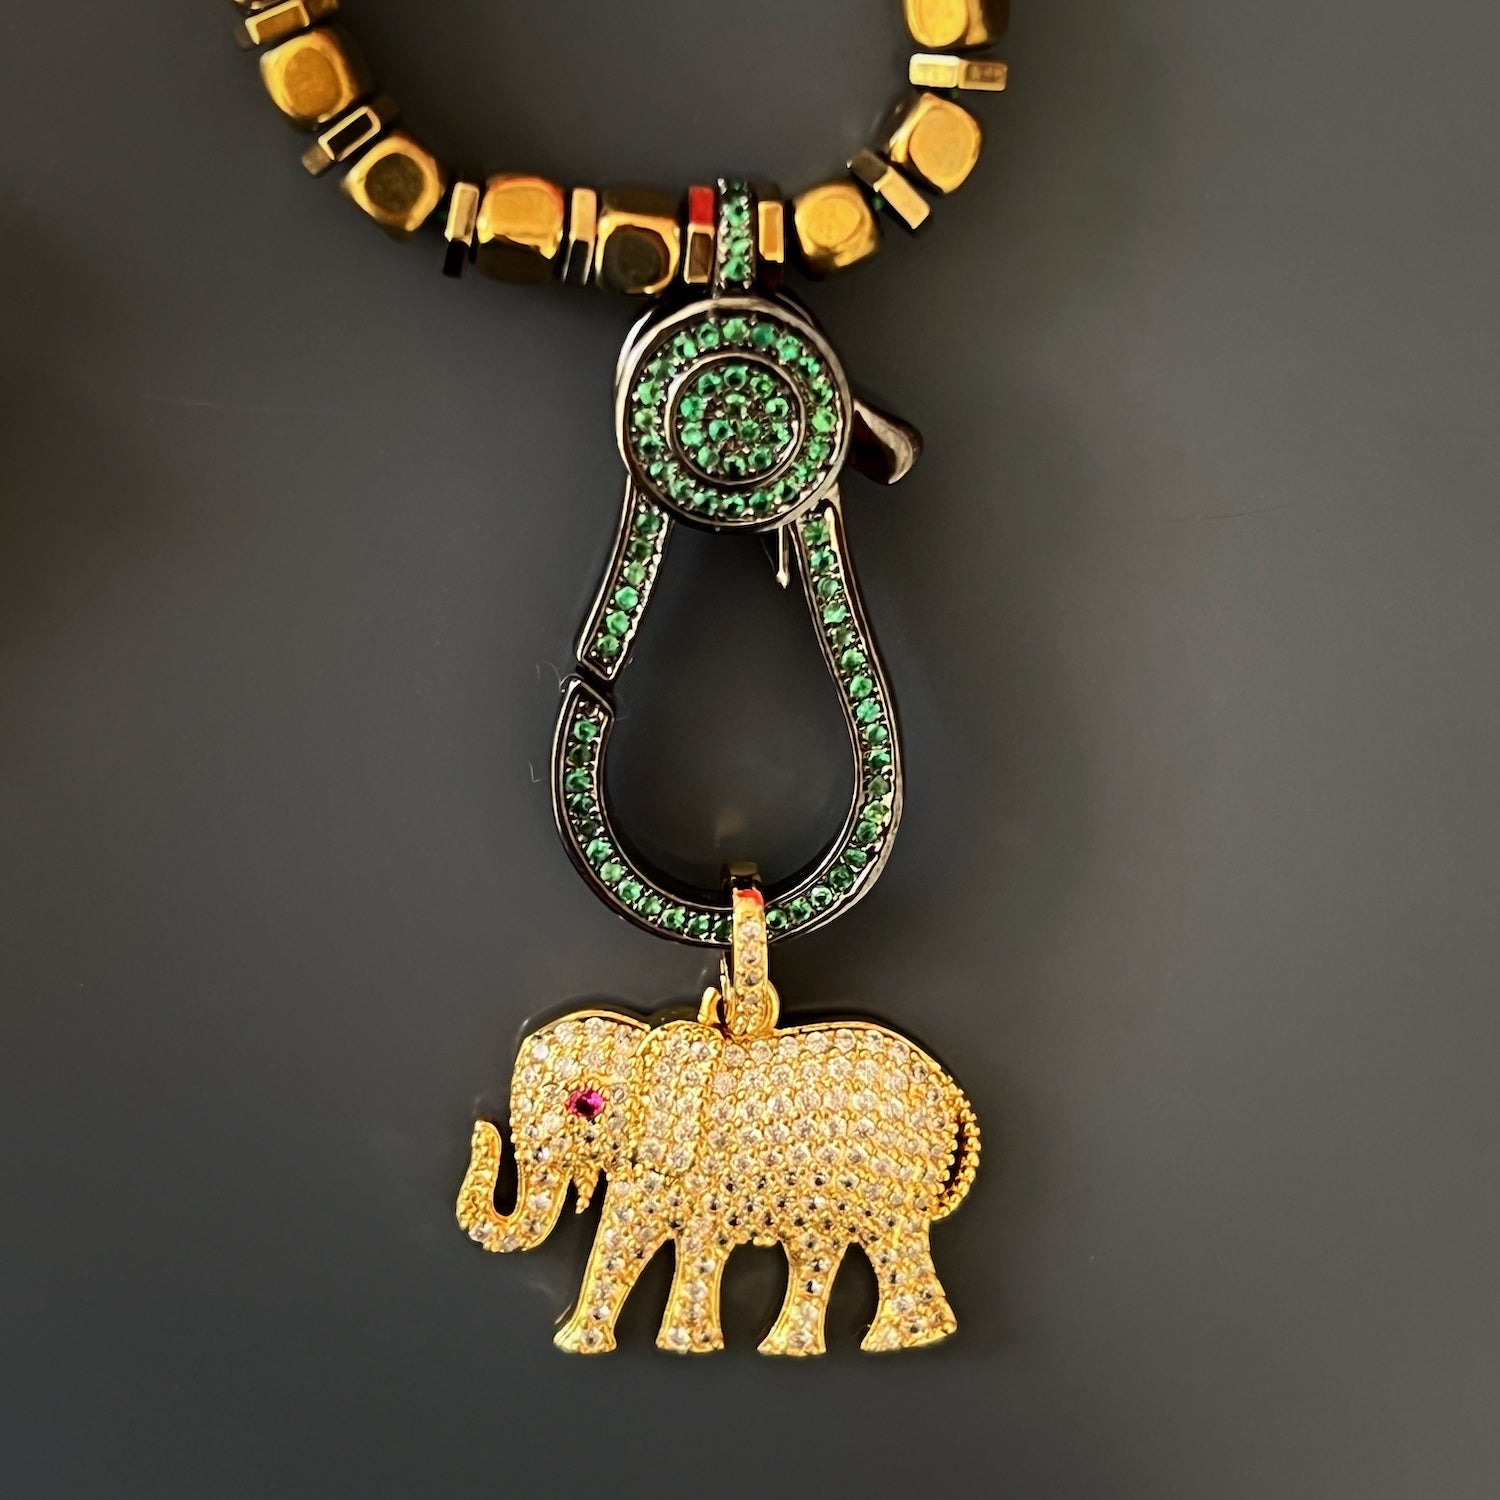 A top-down view of the Diamond Elephant Golden Necklace, displaying the elegant pendant with simulated diamonds and green jade beads against a contrasting background.